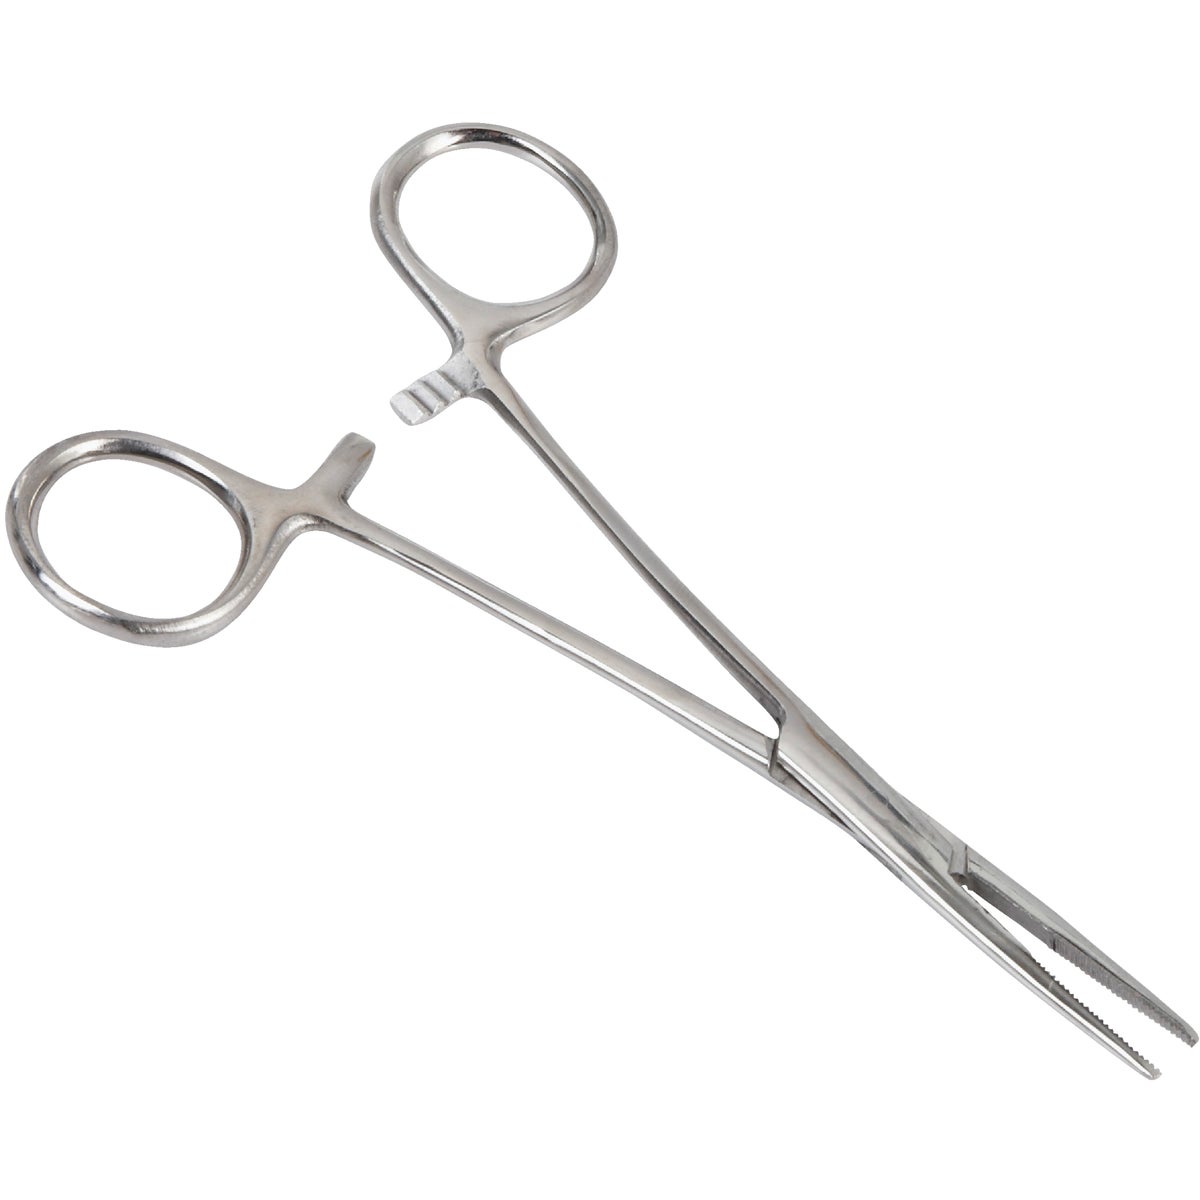 Item 835196, Precision surgical design removes hooks quickly and safely from deeply 